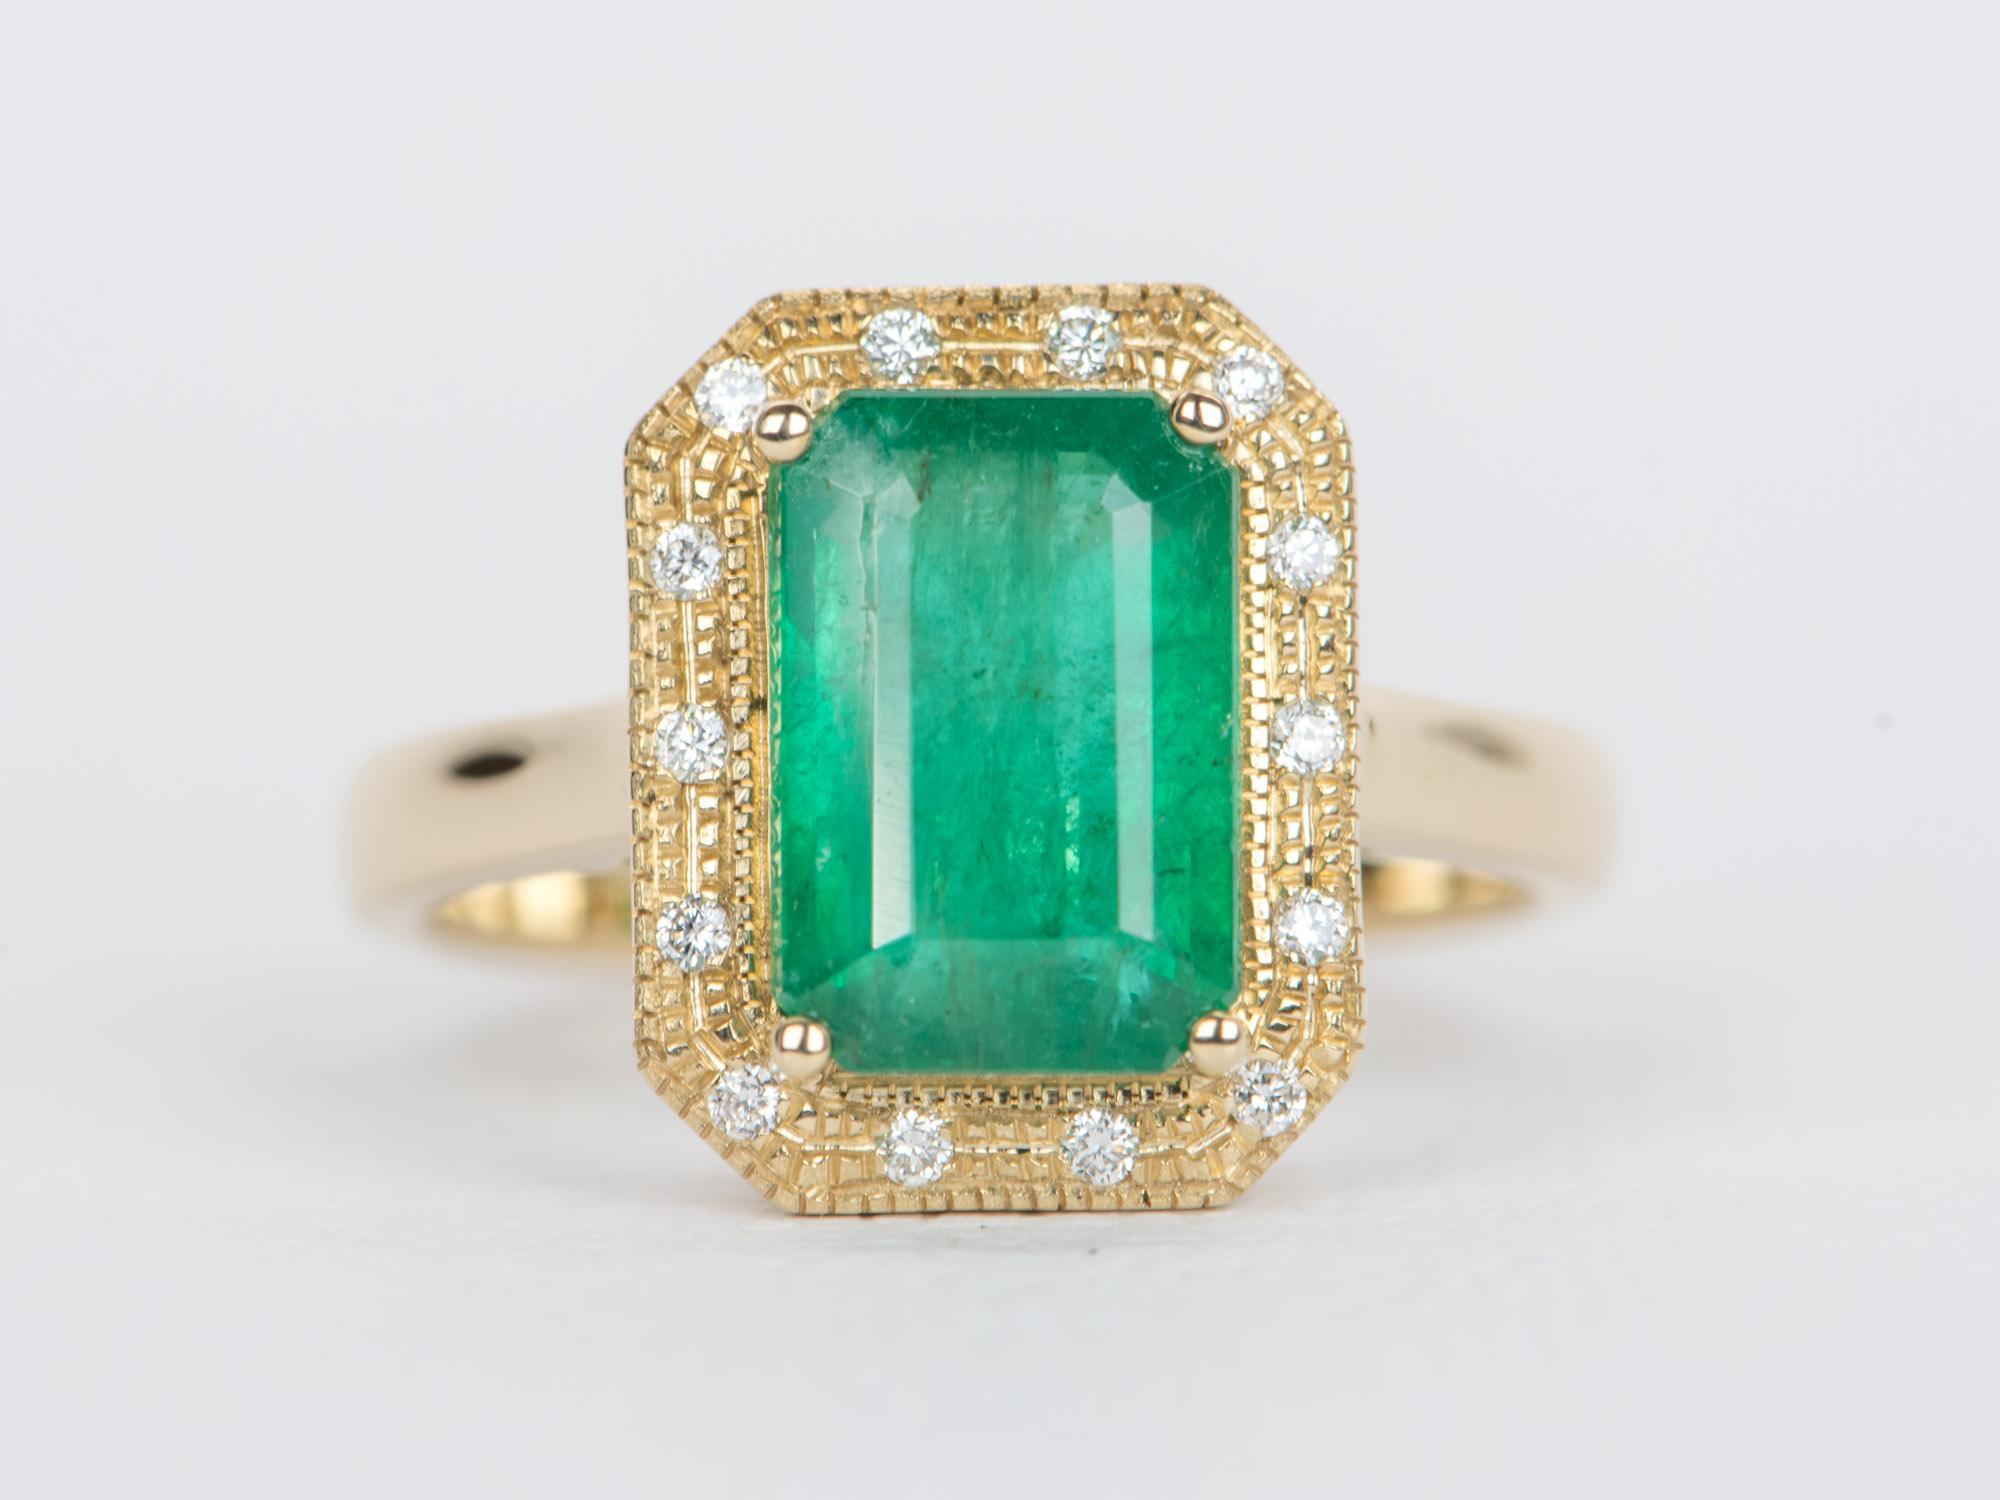 ♥ A solid 14K yellow gold ring set with a beautiful emerald in the center, accented with a beautiful diamond halo
♥ Gorgeous green color!
♥ The item measures 14.2mm in length, 11.2mm in width, and stands 6.5mm from the finger

♥ US Size 7 (Free